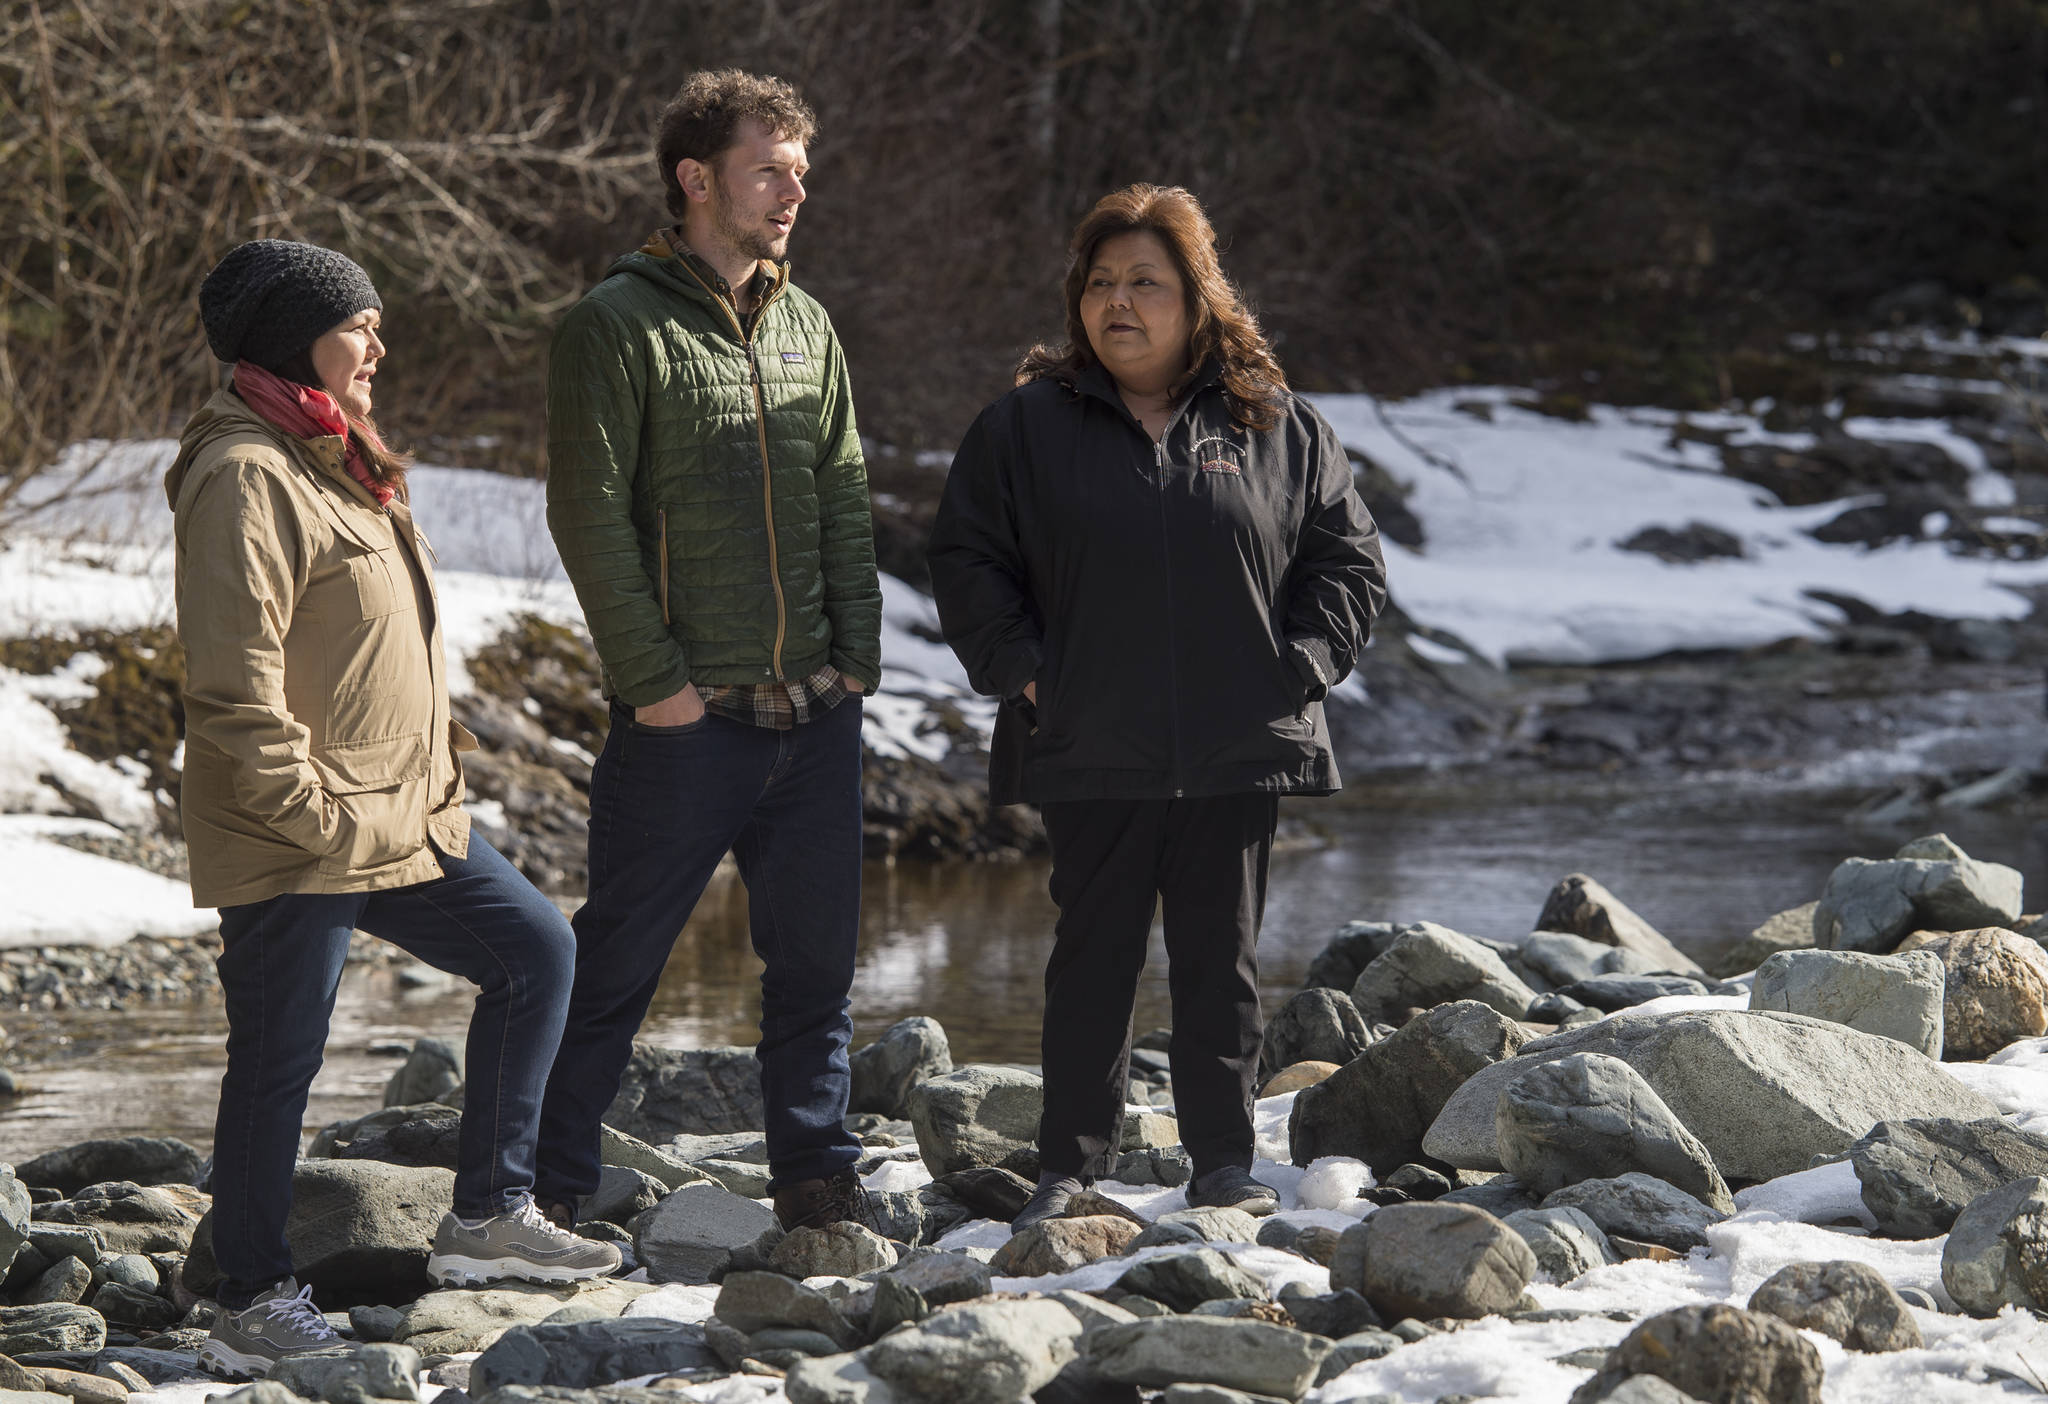 Jacinda Mack, of Fraser River, left, Matthew Jackson, of Sitka, center, and Carrie James, of Ketchikan, talk about their film “Uprivers” in Juneau on March 29, 2018. The documentary film is about the perils an unchecked Canadian mining industry and the threat posed to Southeast Alaska watersheds. (Michael Penn | Juneau Empire)